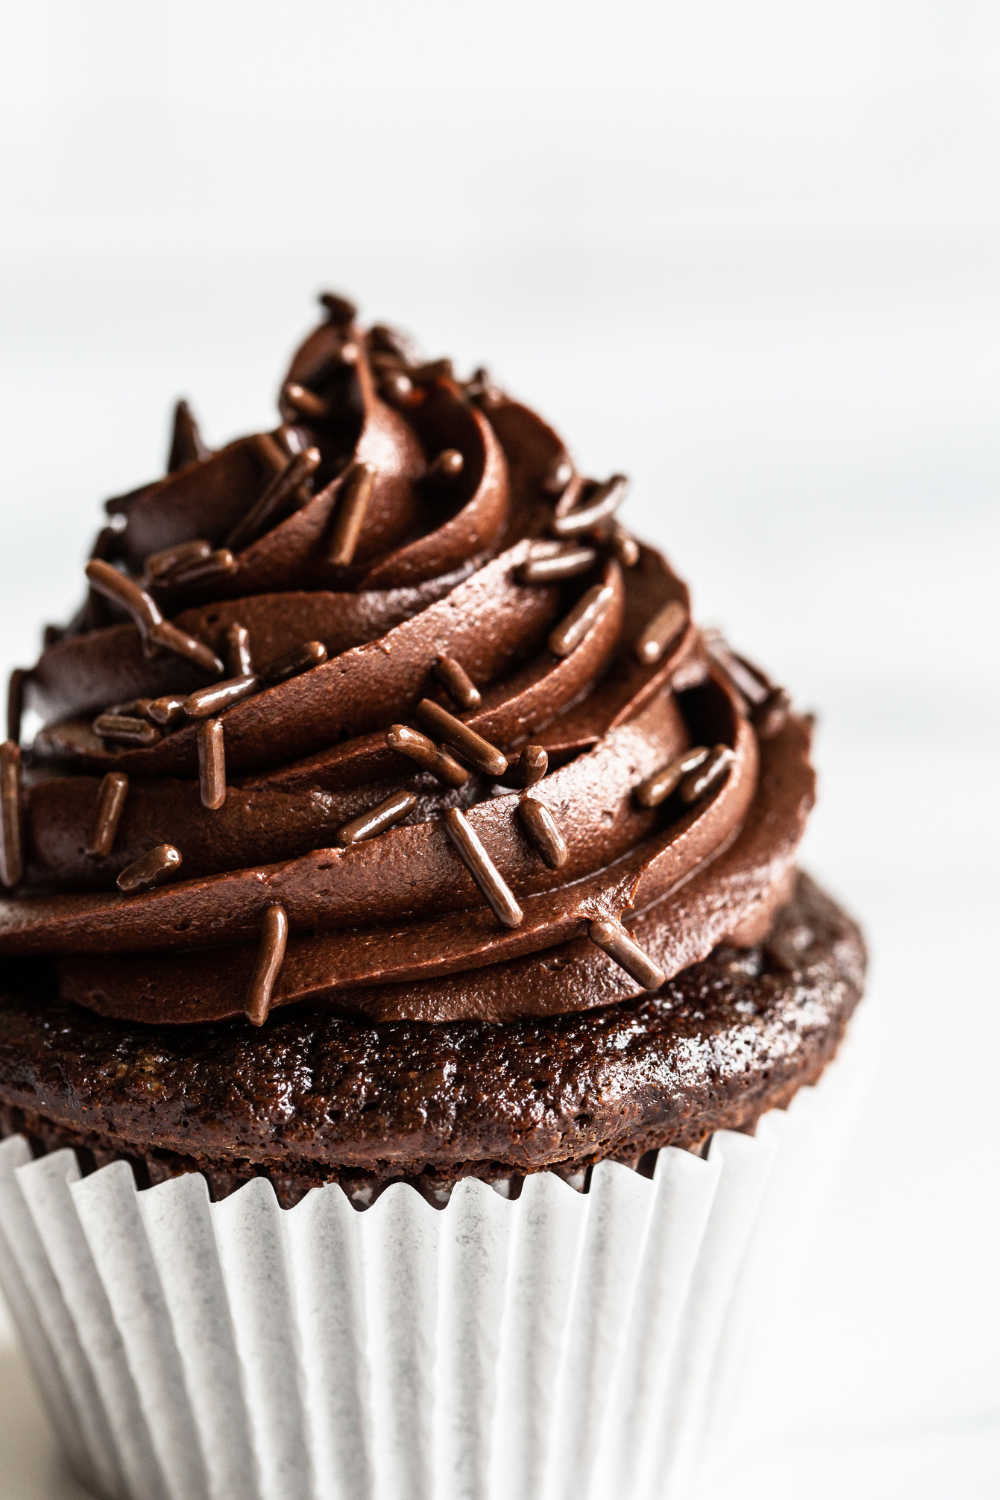 close up of chocolate frosting and chocolate sprinkles on a chocolate cupcake